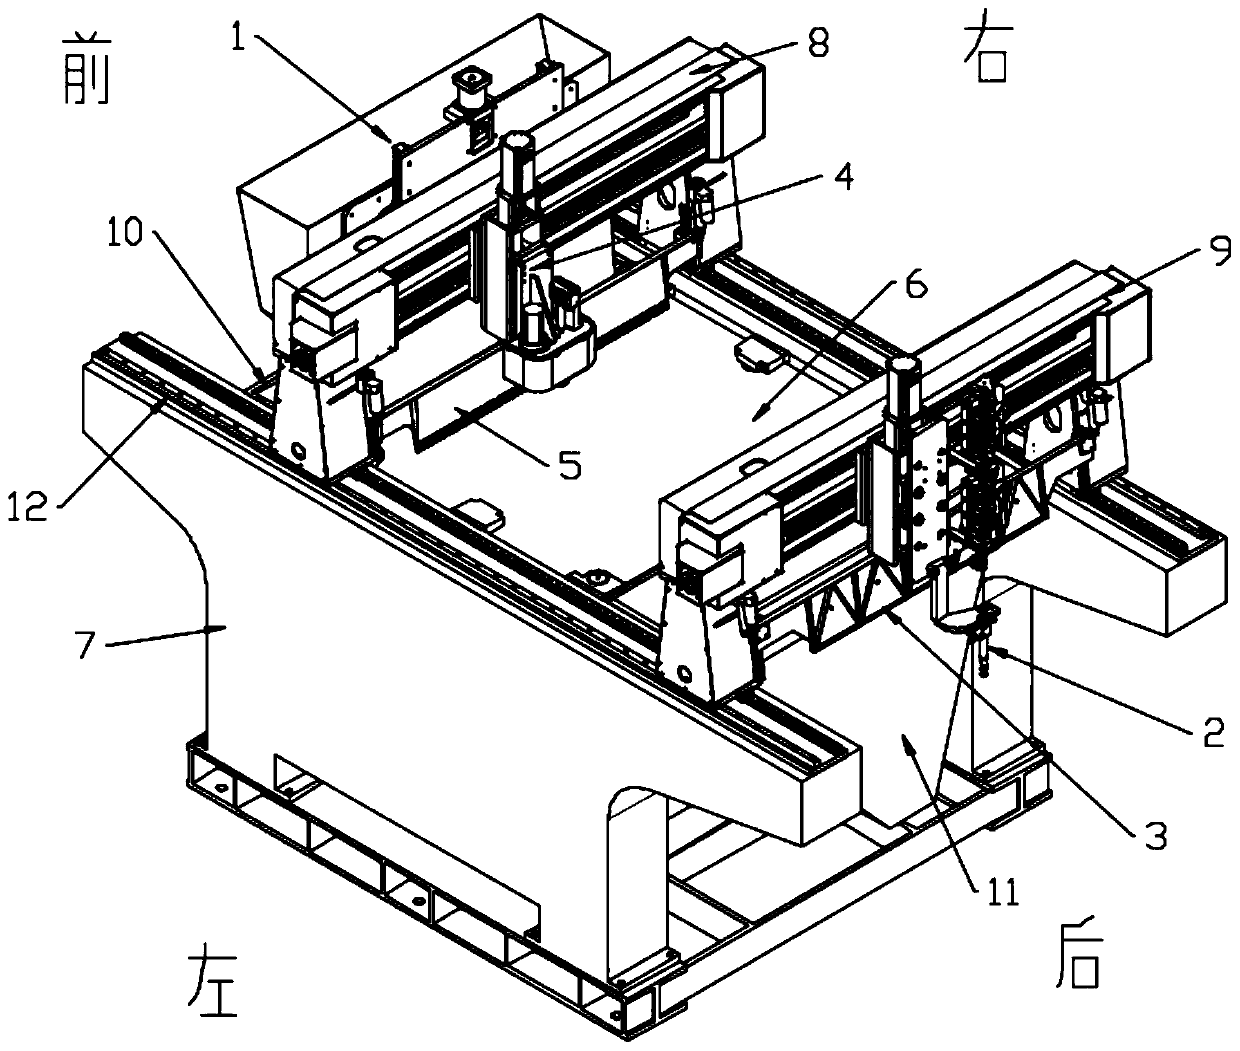 Full-automatic metal additive submerged arc printing equipment and method